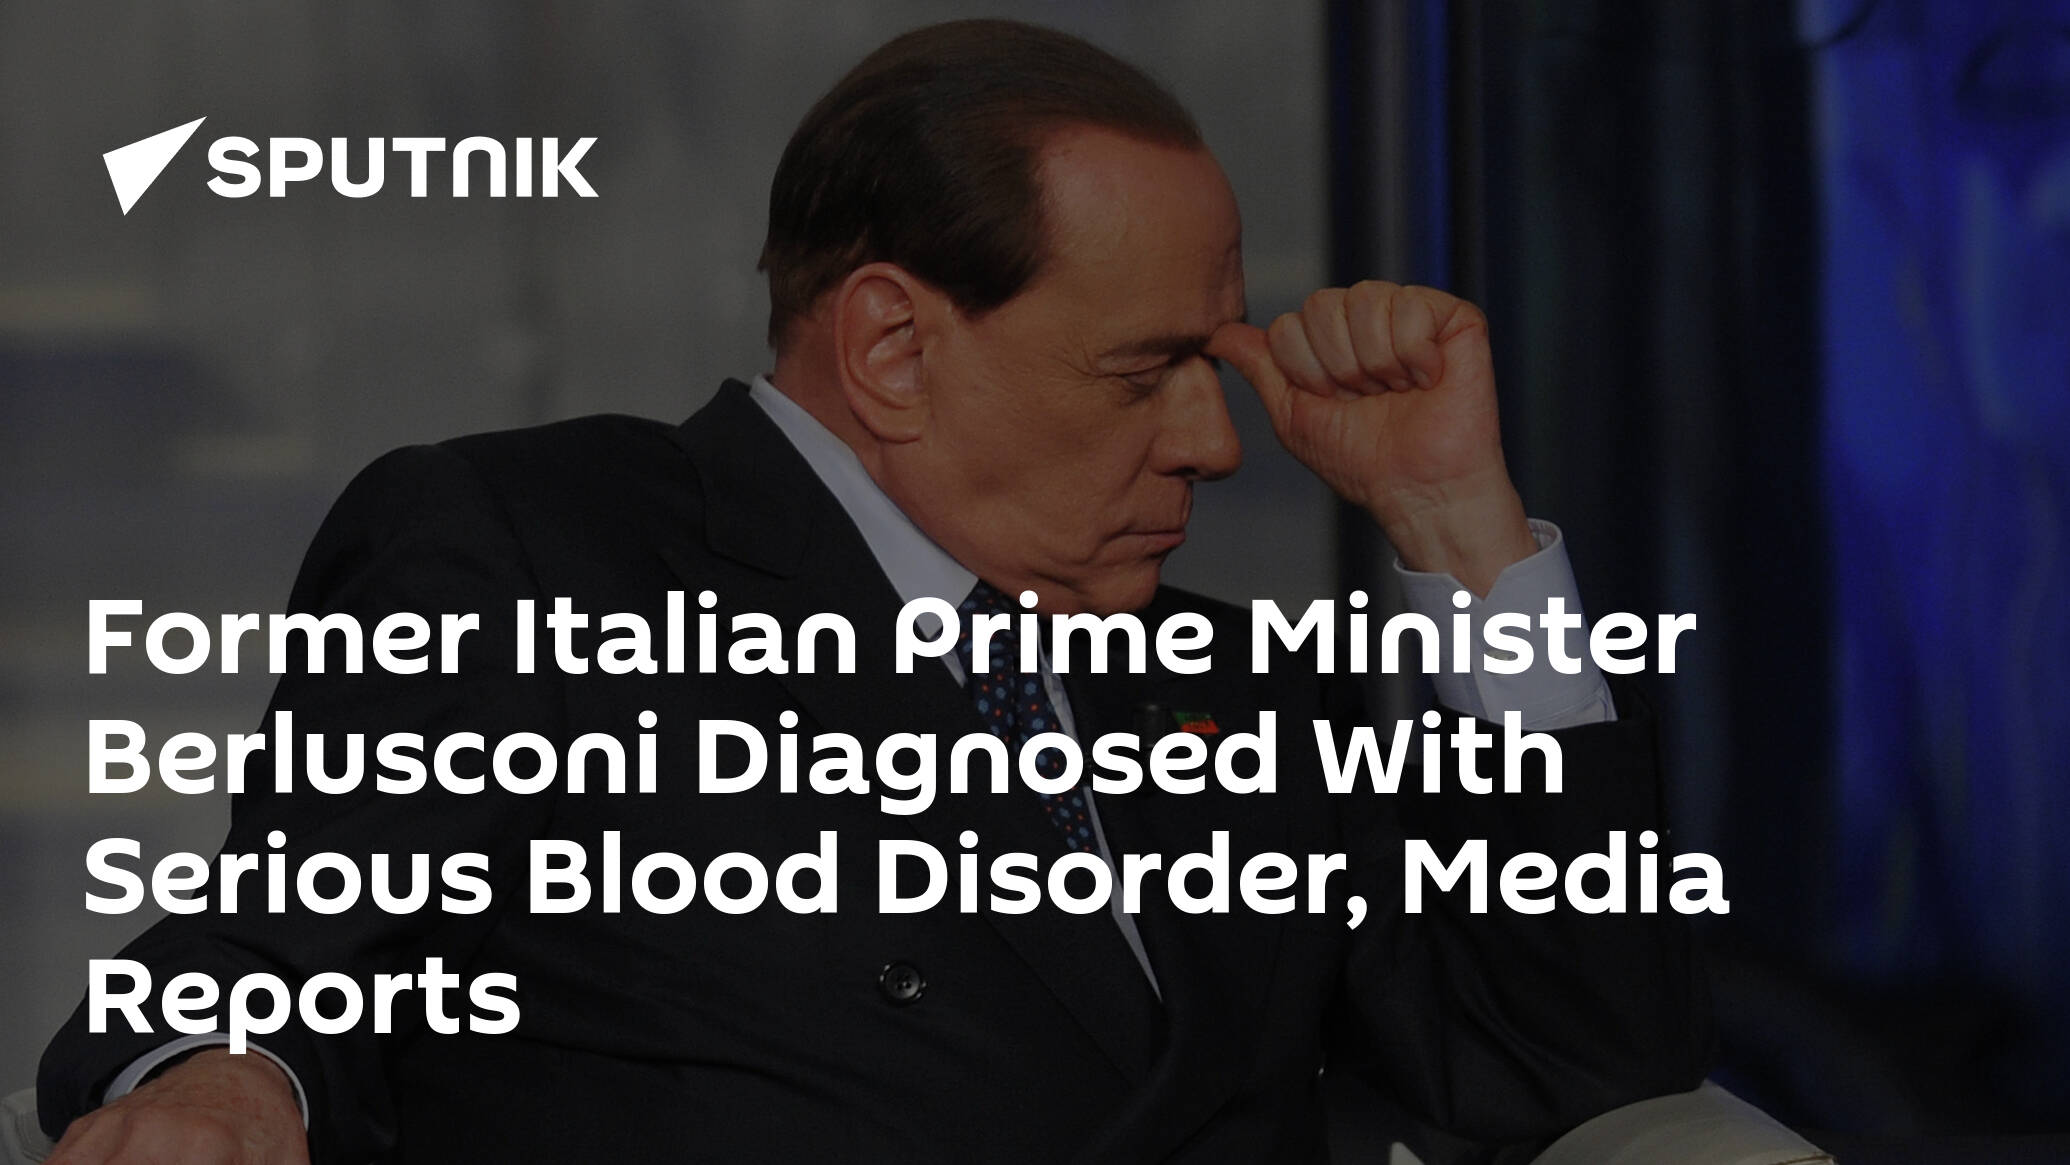 Former Italian Prime Minister Berlusconi Diagnosed With Serious Blood Disorder, Media Reports